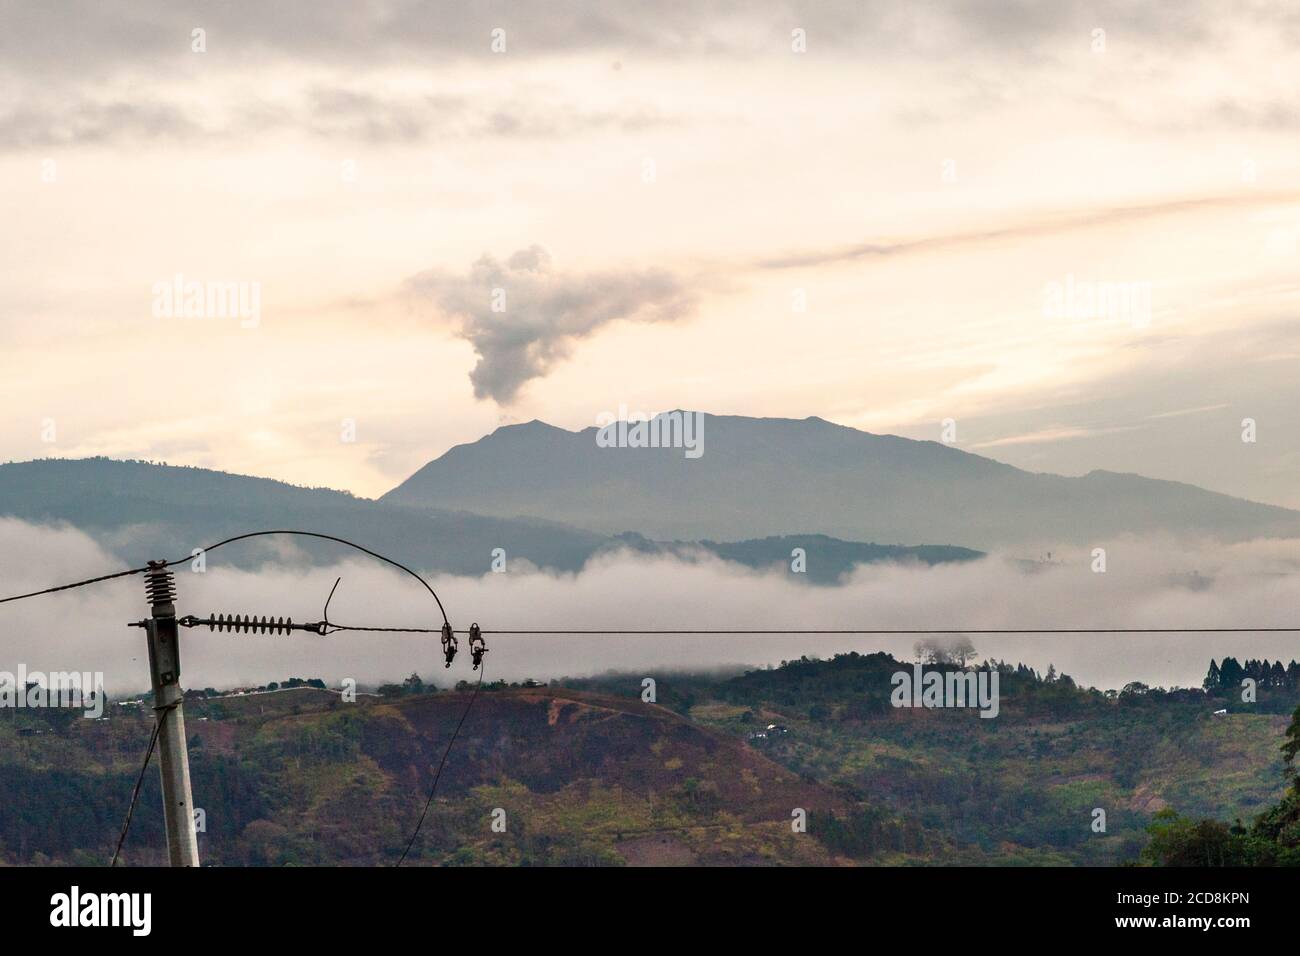 Morning mood with power line in front of a smoking volcano in Costa Rica Stock Photo